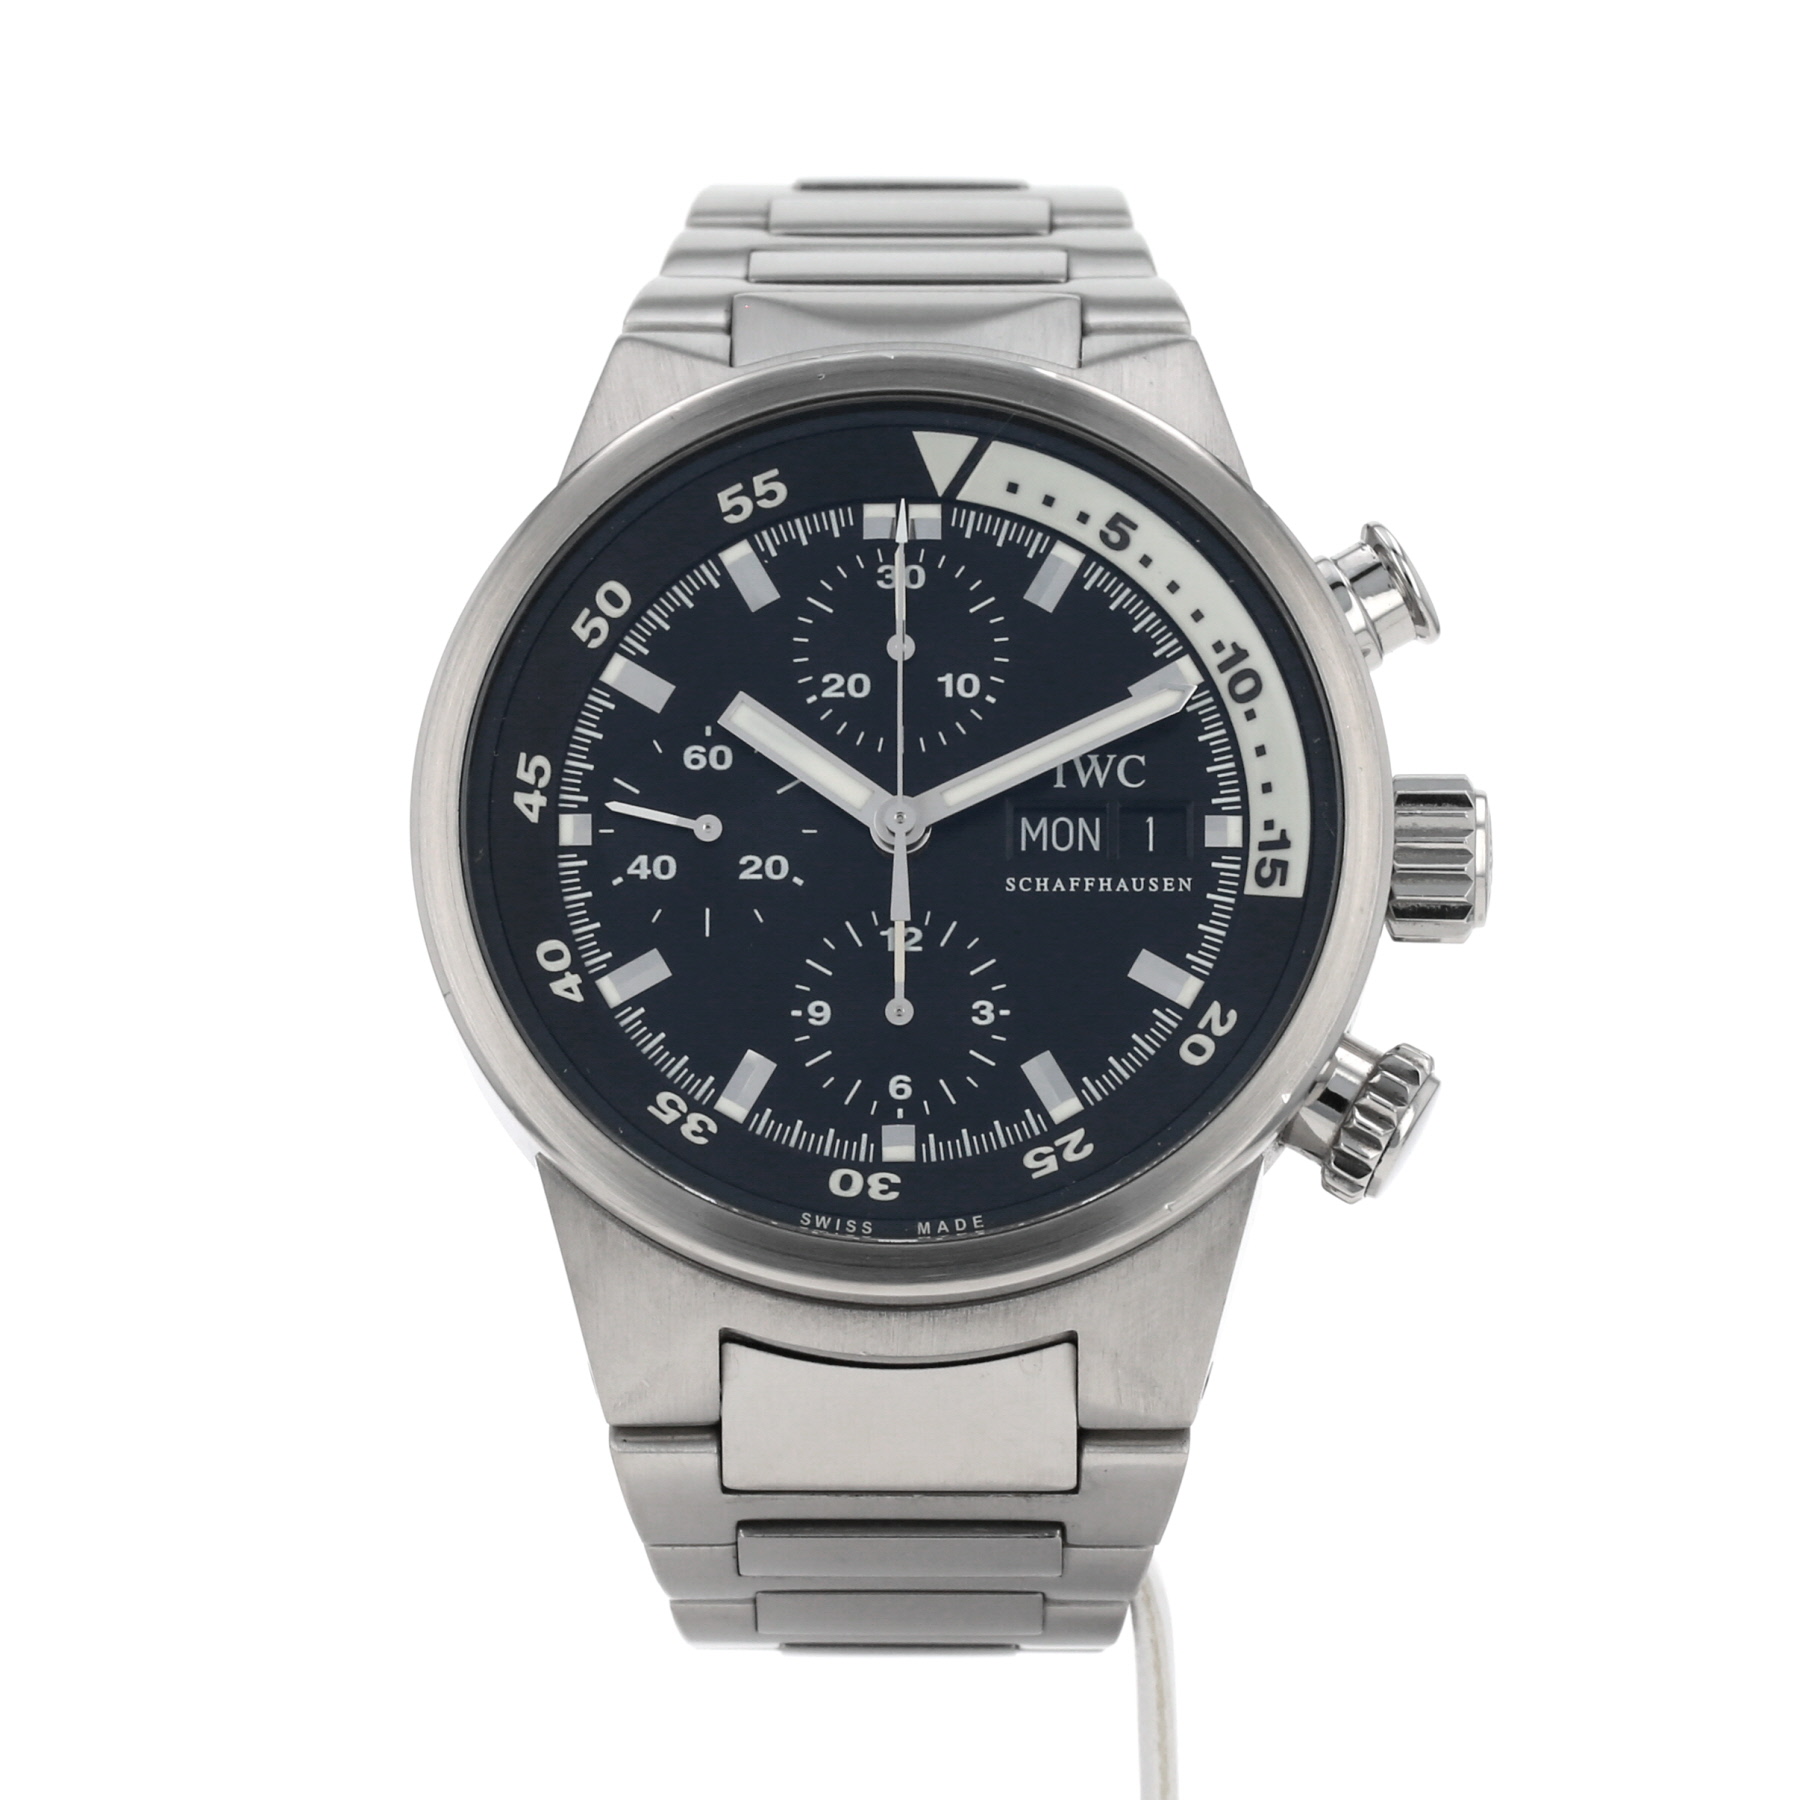 Aquatimer- Chronograph In Stainless Steel Ref: 3719 Circa